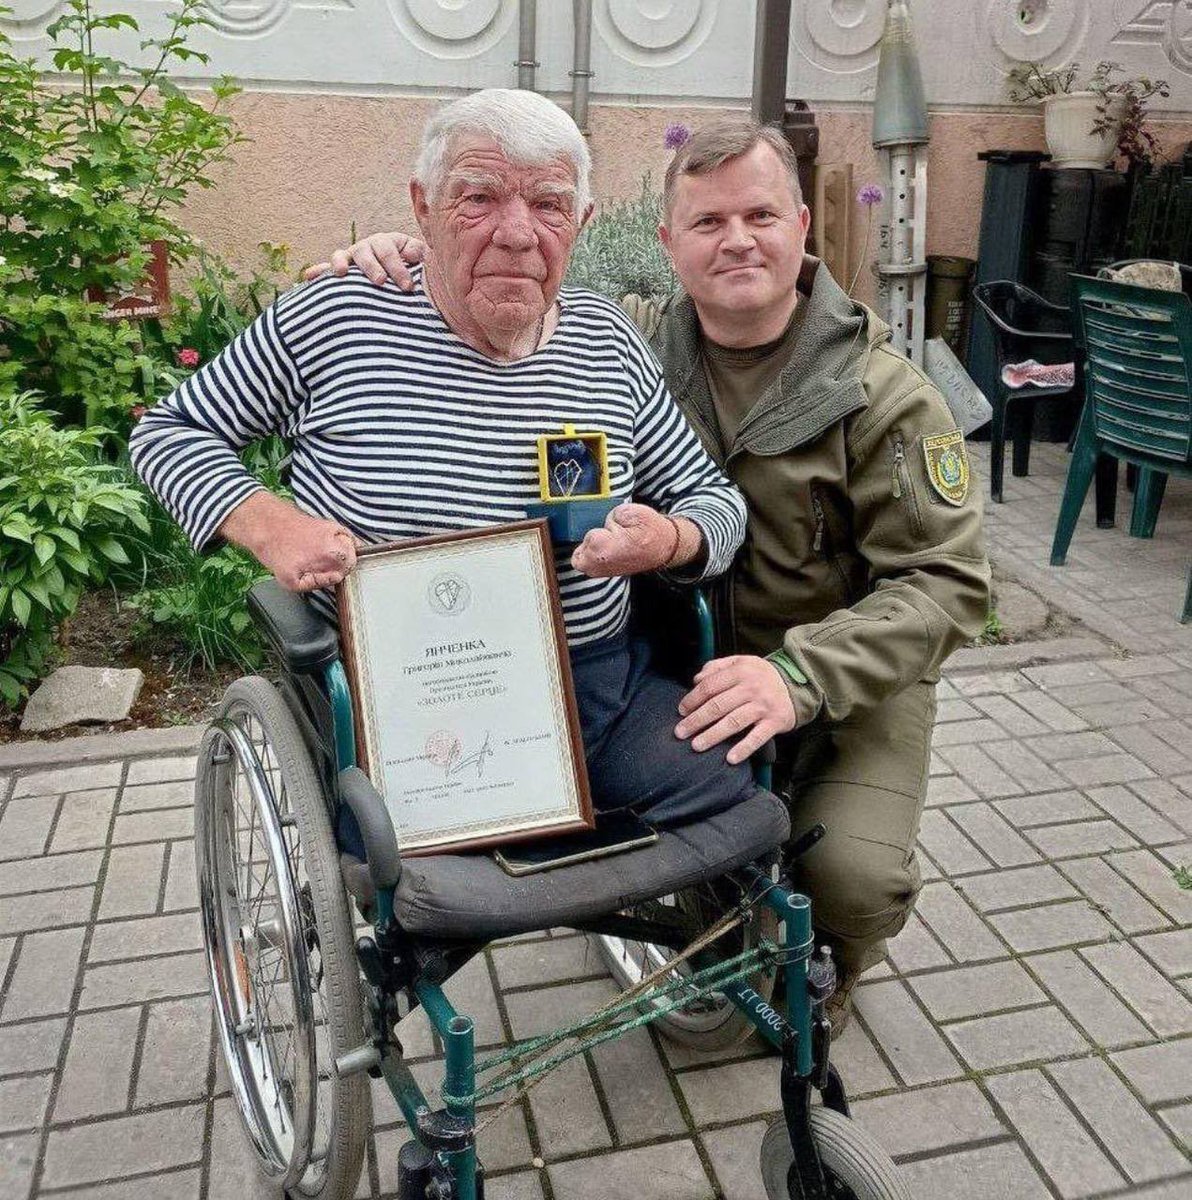 Kherson volunteer Mr Hryhorii, known as Uncle Hrisha received a 'Heart of Gold' award. He survived Russian occupation and never hid his love for Ukraine. Hryhorii Yanchenko, 77, raised about 8 million UAH for the Ukrainian Army. He has been supporting the AFU since 2014 and…